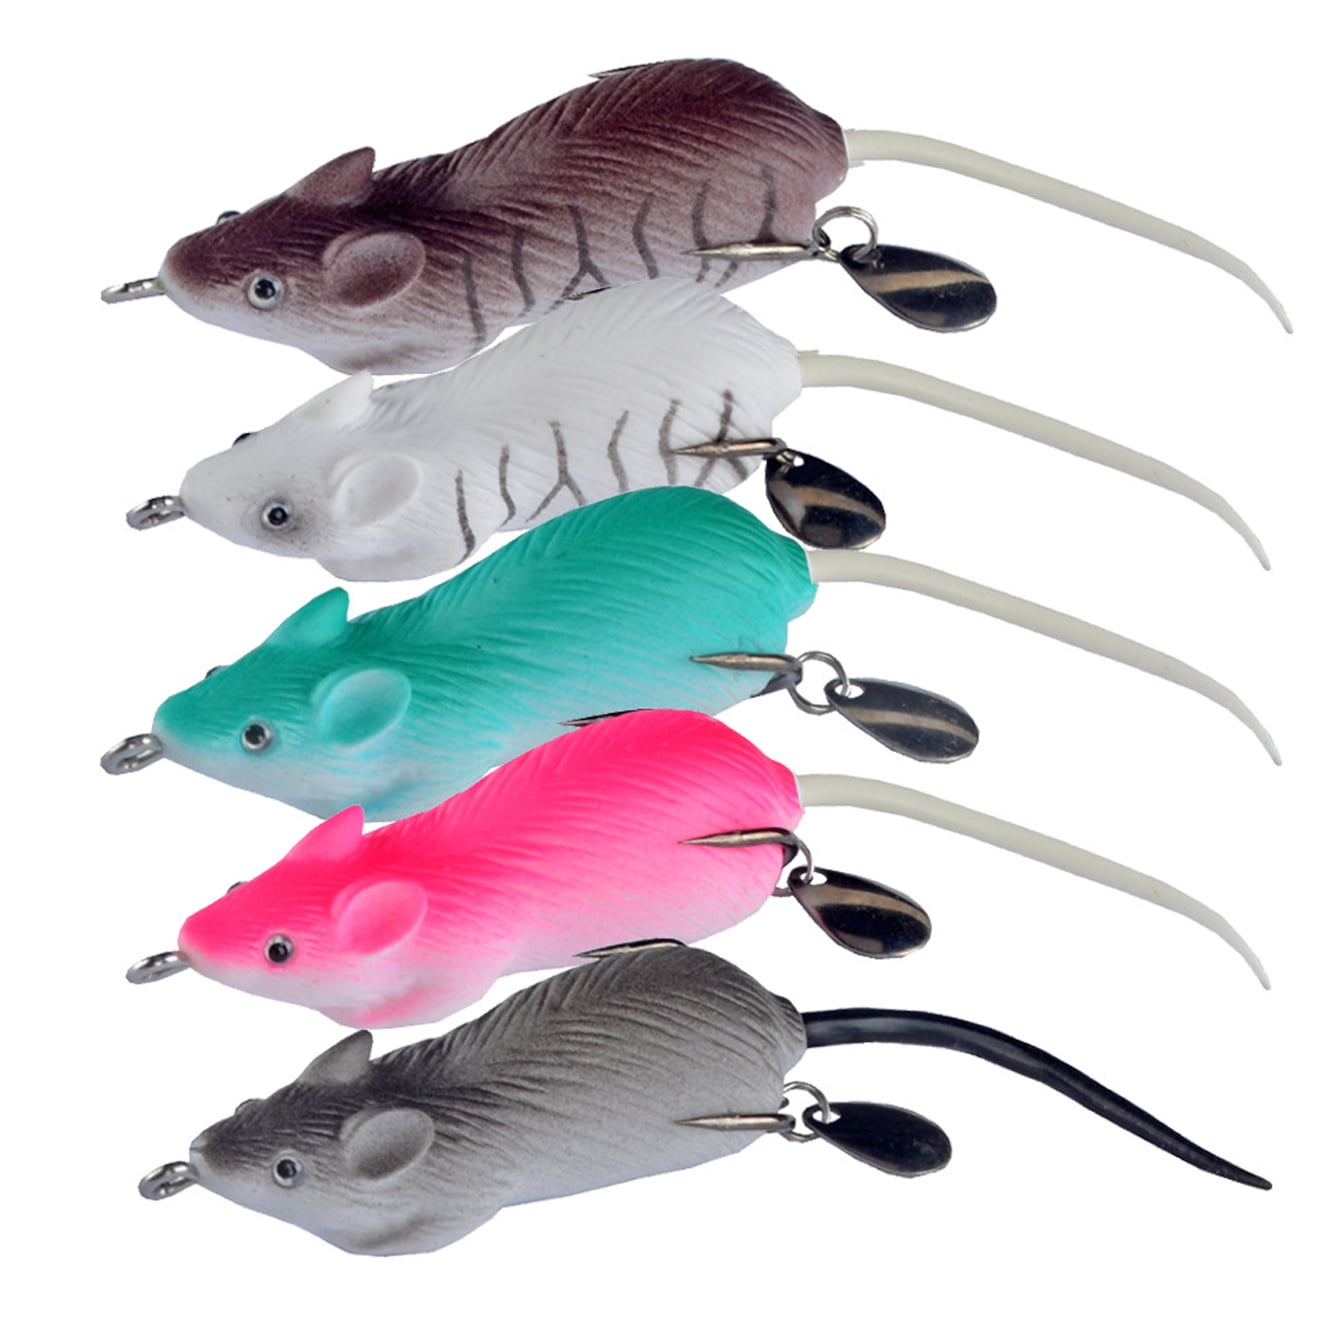 40Pcs Rubber Frog Fishing Lures Soft Topwater Mice Frog Bait hooks 